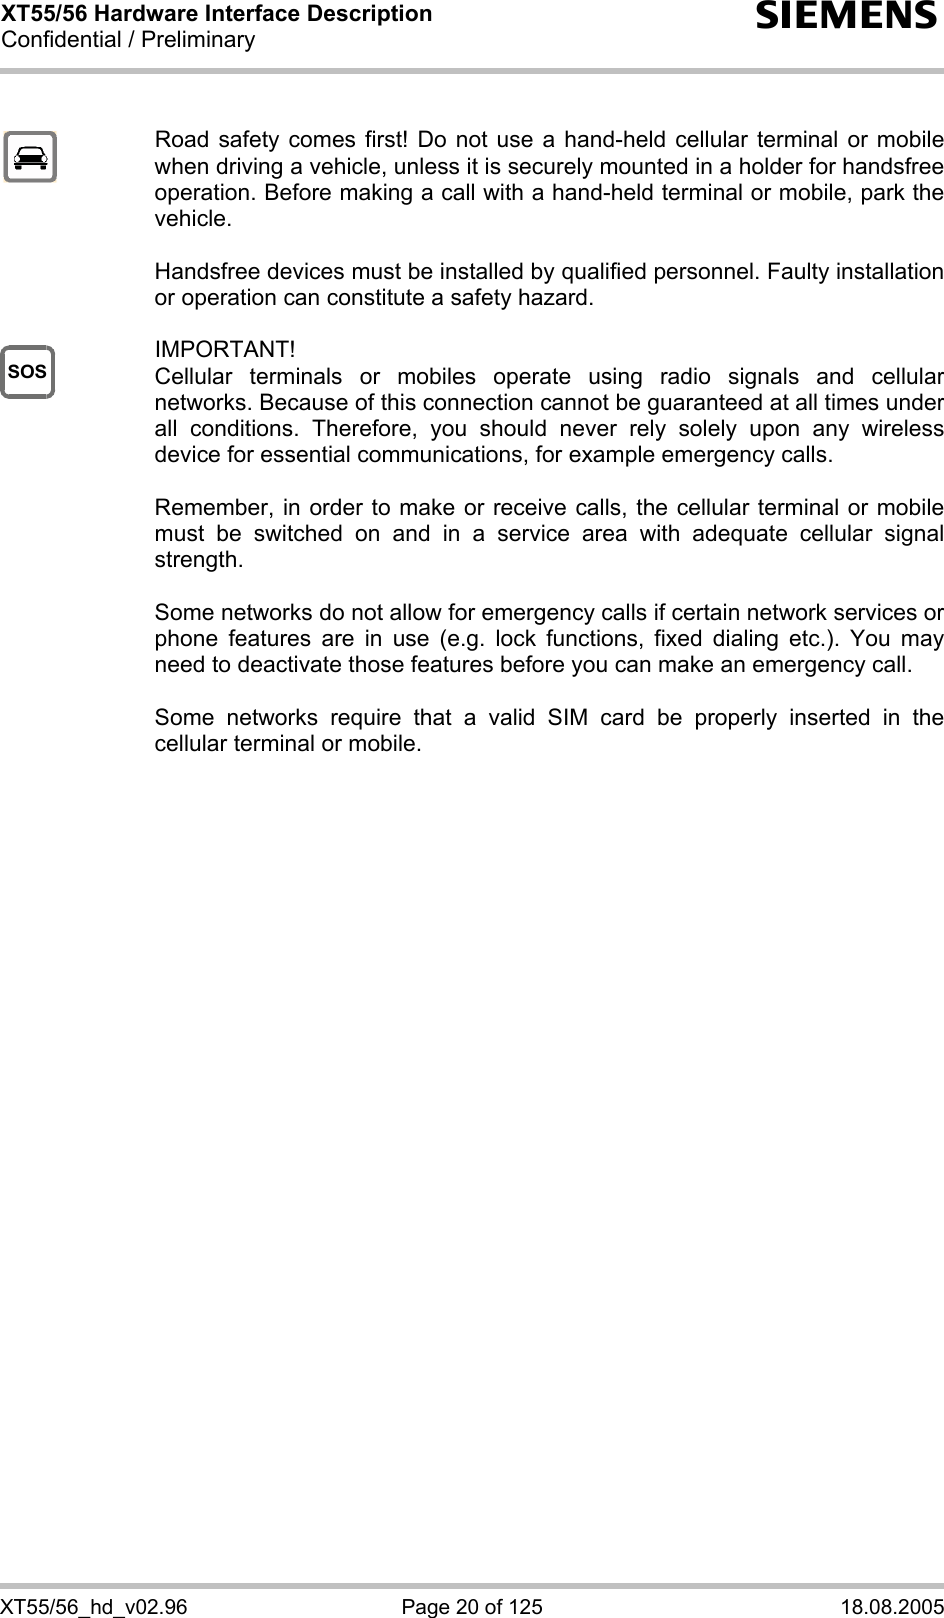 XT55/56 Hardware Interface Description Confidential / Preliminary s XT55/56_hd_v02.96  Page 20 of 125  18.08.2005 SOS   Road safety comes first! Do not use a hand-held cellular terminal or mobile when driving a vehicle, unless it is securely mounted in a holder for handsfree operation. Before making a call with a hand-held terminal or mobile, park the vehicle.   Handsfree devices must be installed by qualified personnel. Faulty installation or operation can constitute a safety hazard.   IMPORTANT! Cellular terminals or mobiles operate using radio signals and cellular networks. Because of this connection cannot be guaranteed at all times under all conditions. Therefore, you should never rely solely upon any wireless device for essential communications, for example emergency calls.   Remember, in order to make or receive calls, the cellular terminal or mobile must be switched on and in a service area with adequate cellular signal strength.   Some networks do not allow for emergency calls if certain network services or phone features are in use (e.g. lock functions, fixed dialing etc.). You may need to deactivate those features before you can make an emergency call.  Some networks require that a valid SIM card be properly inserted in the cellular terminal or mobile.         